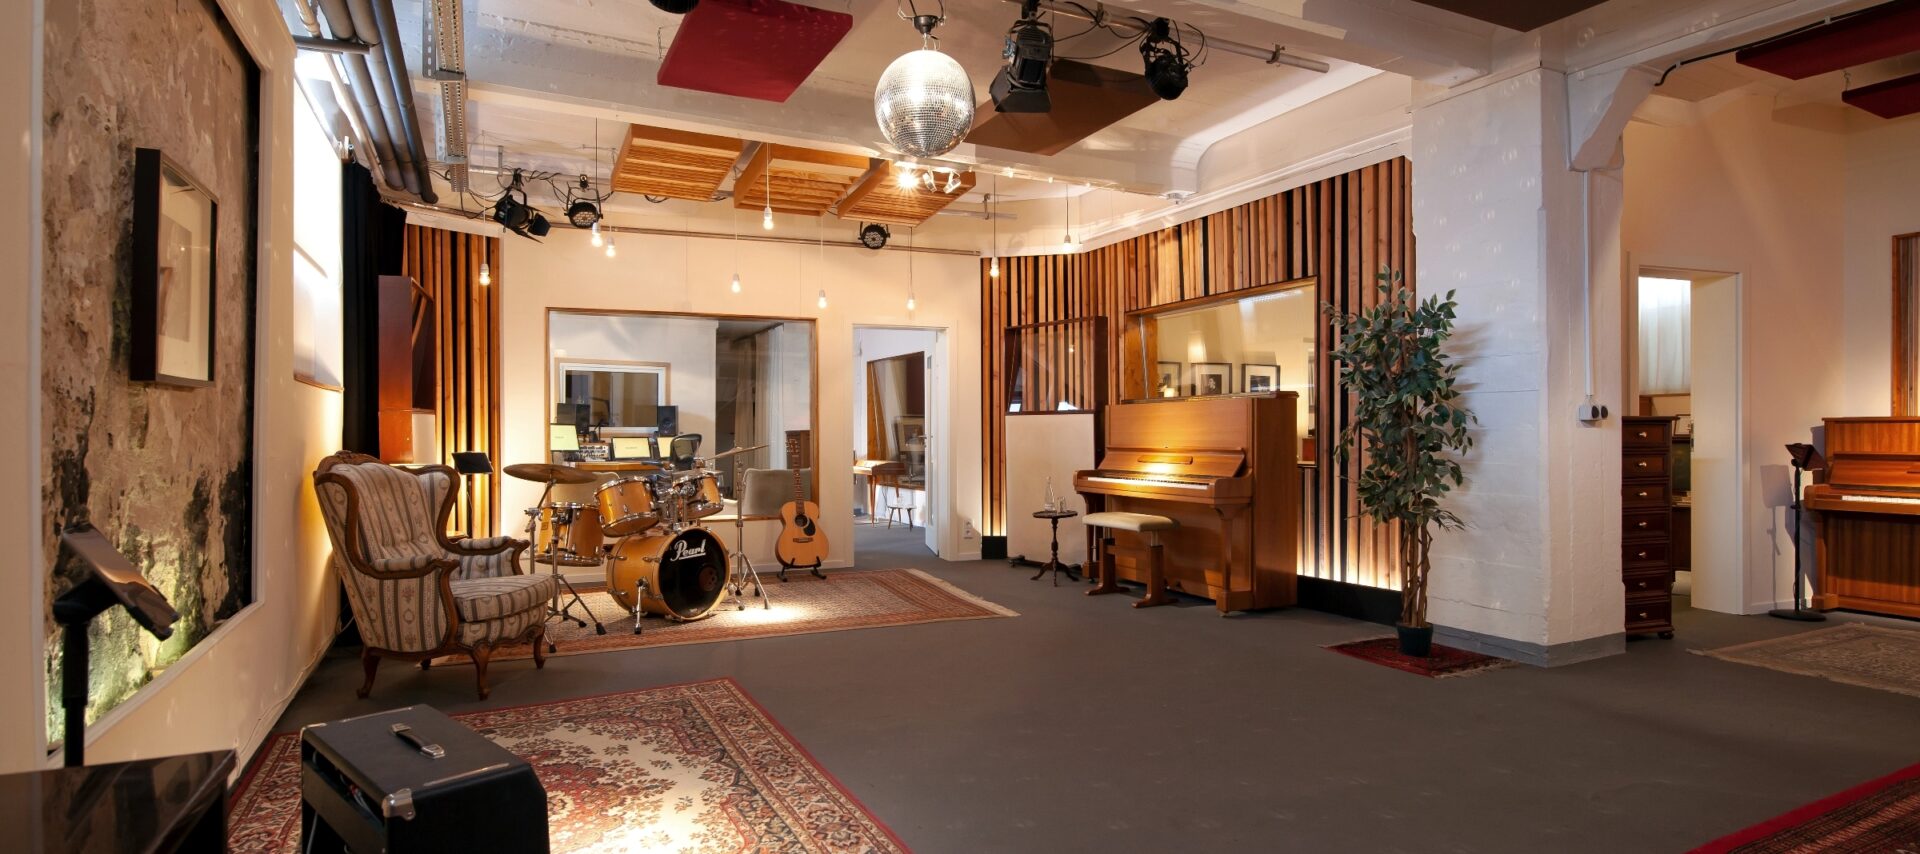 View into large recording studio with piano, drums and other rooms.